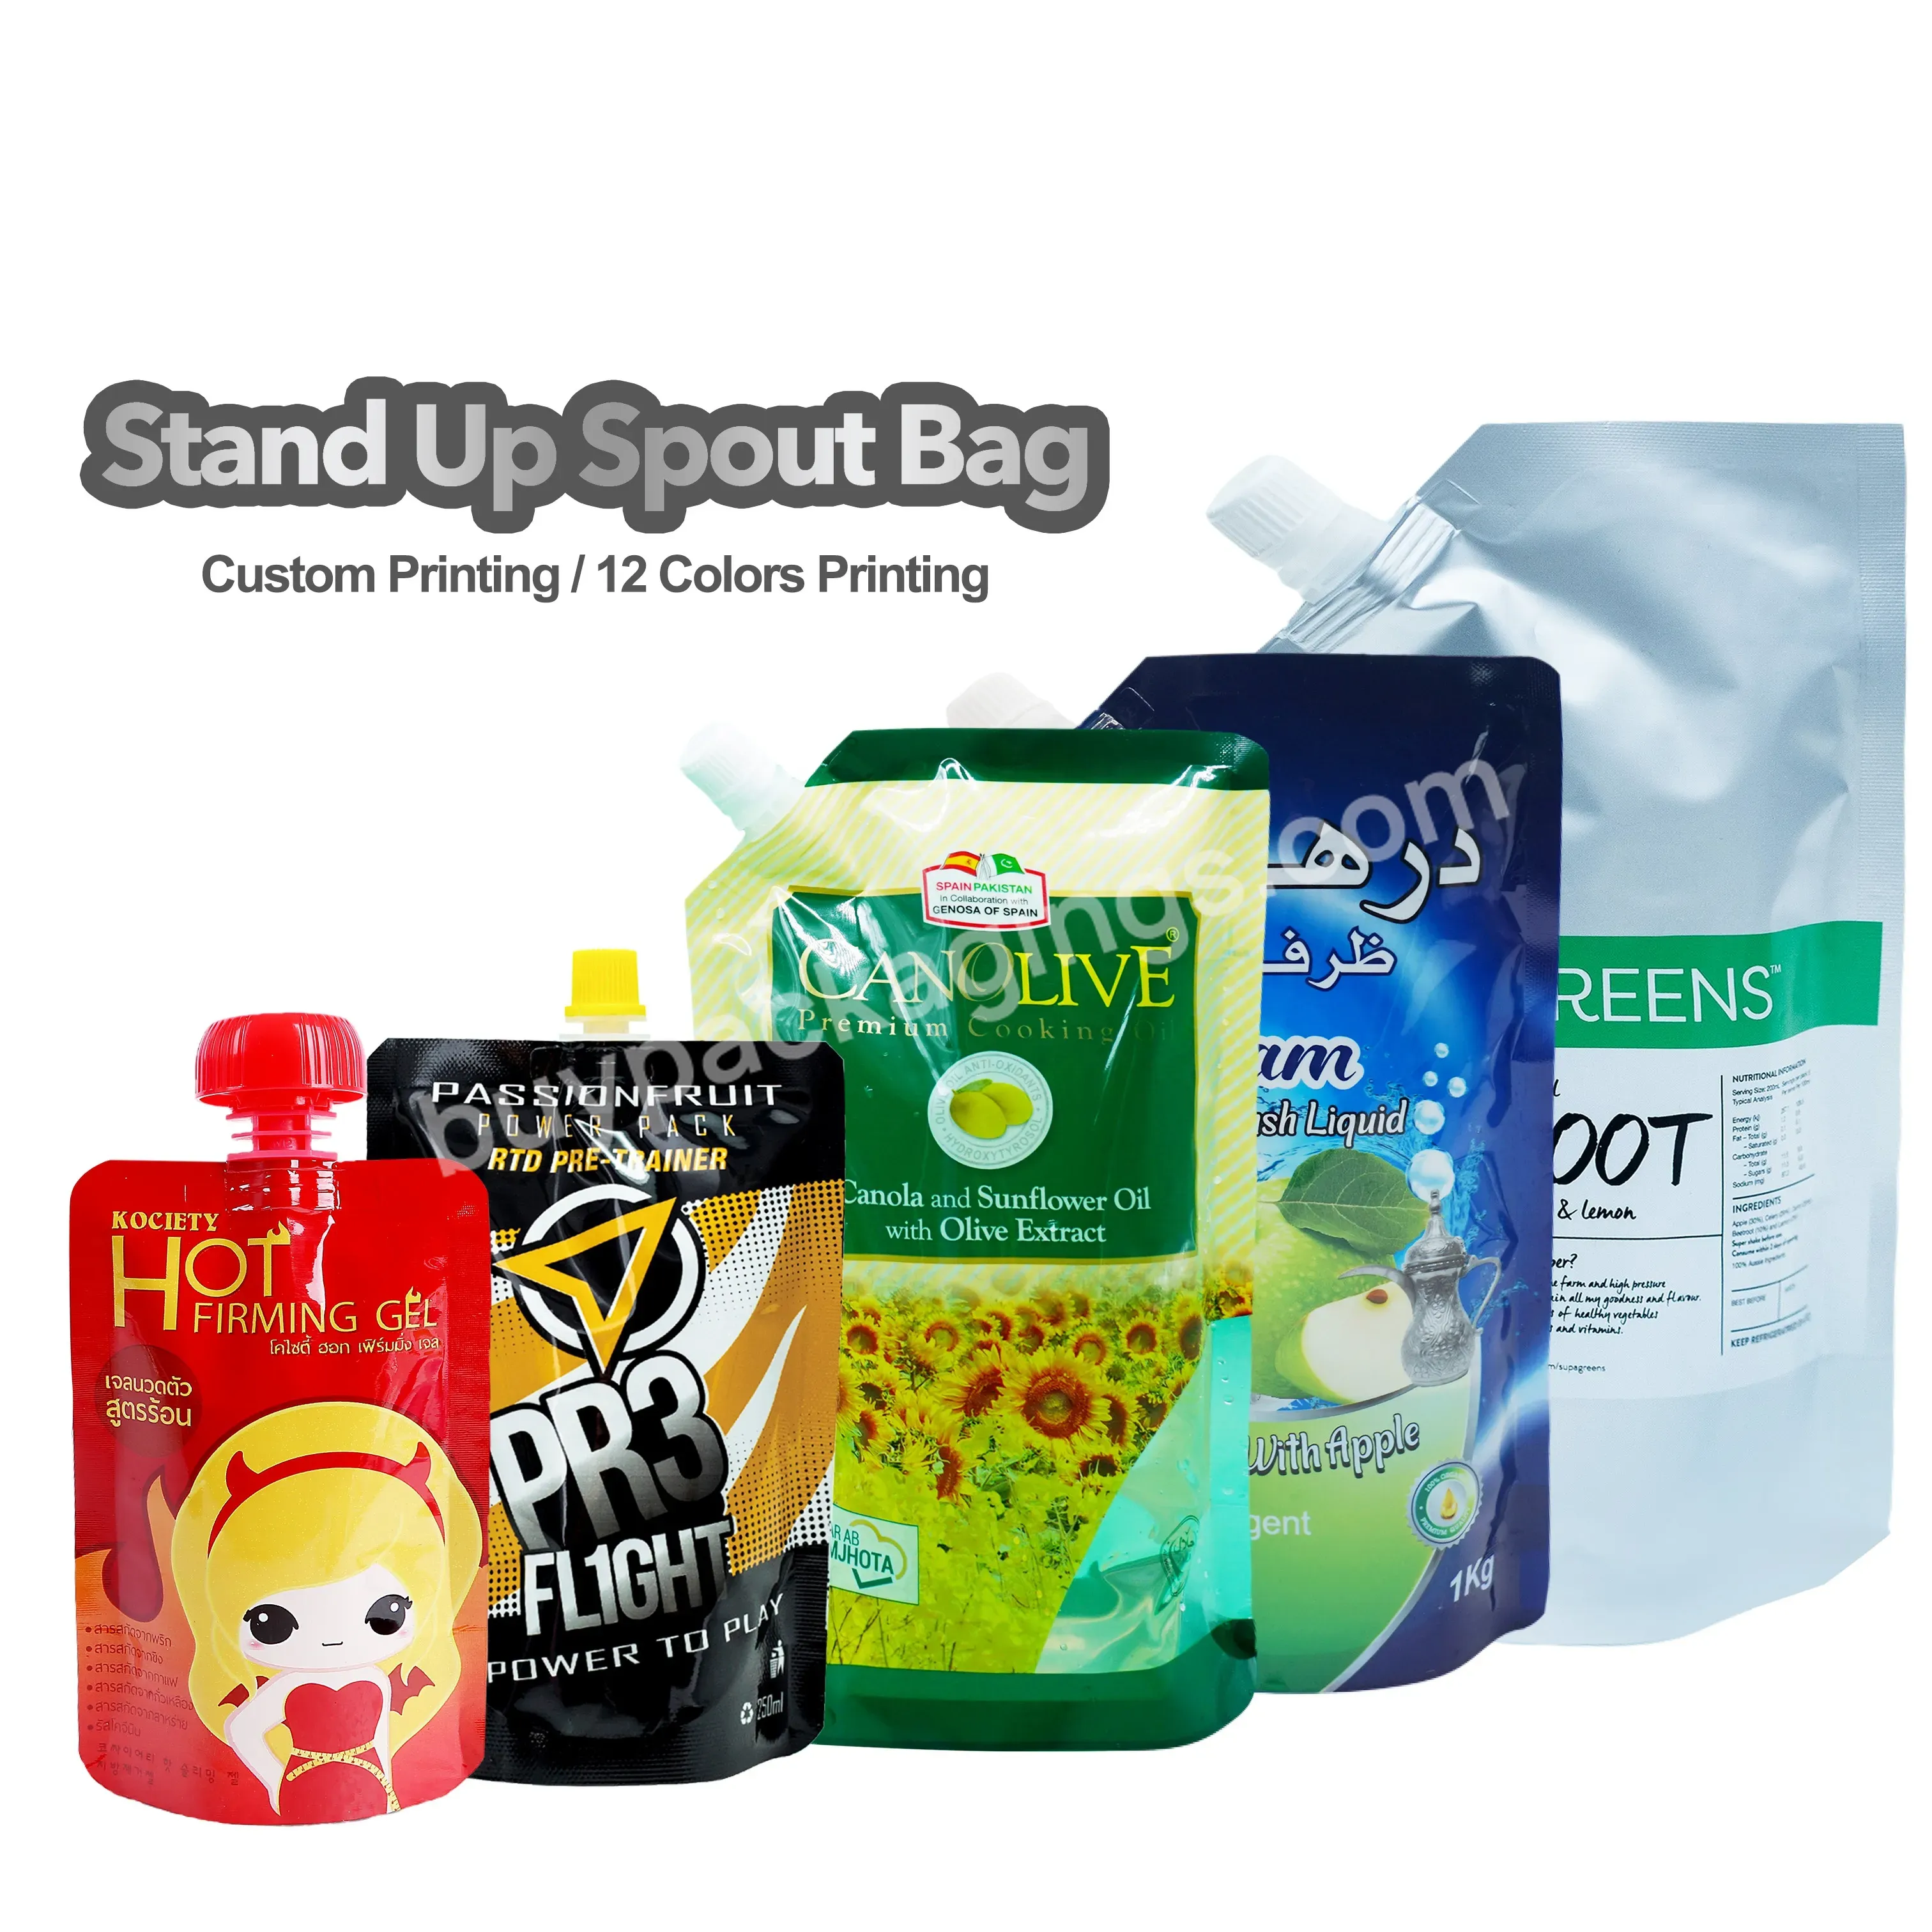 Bpa Free 750ml Reusable Special Shape Refill Bags Clear Plastic Packaging Doypack Liquid Drink Pouches Stand Up Spout Pouch Bag